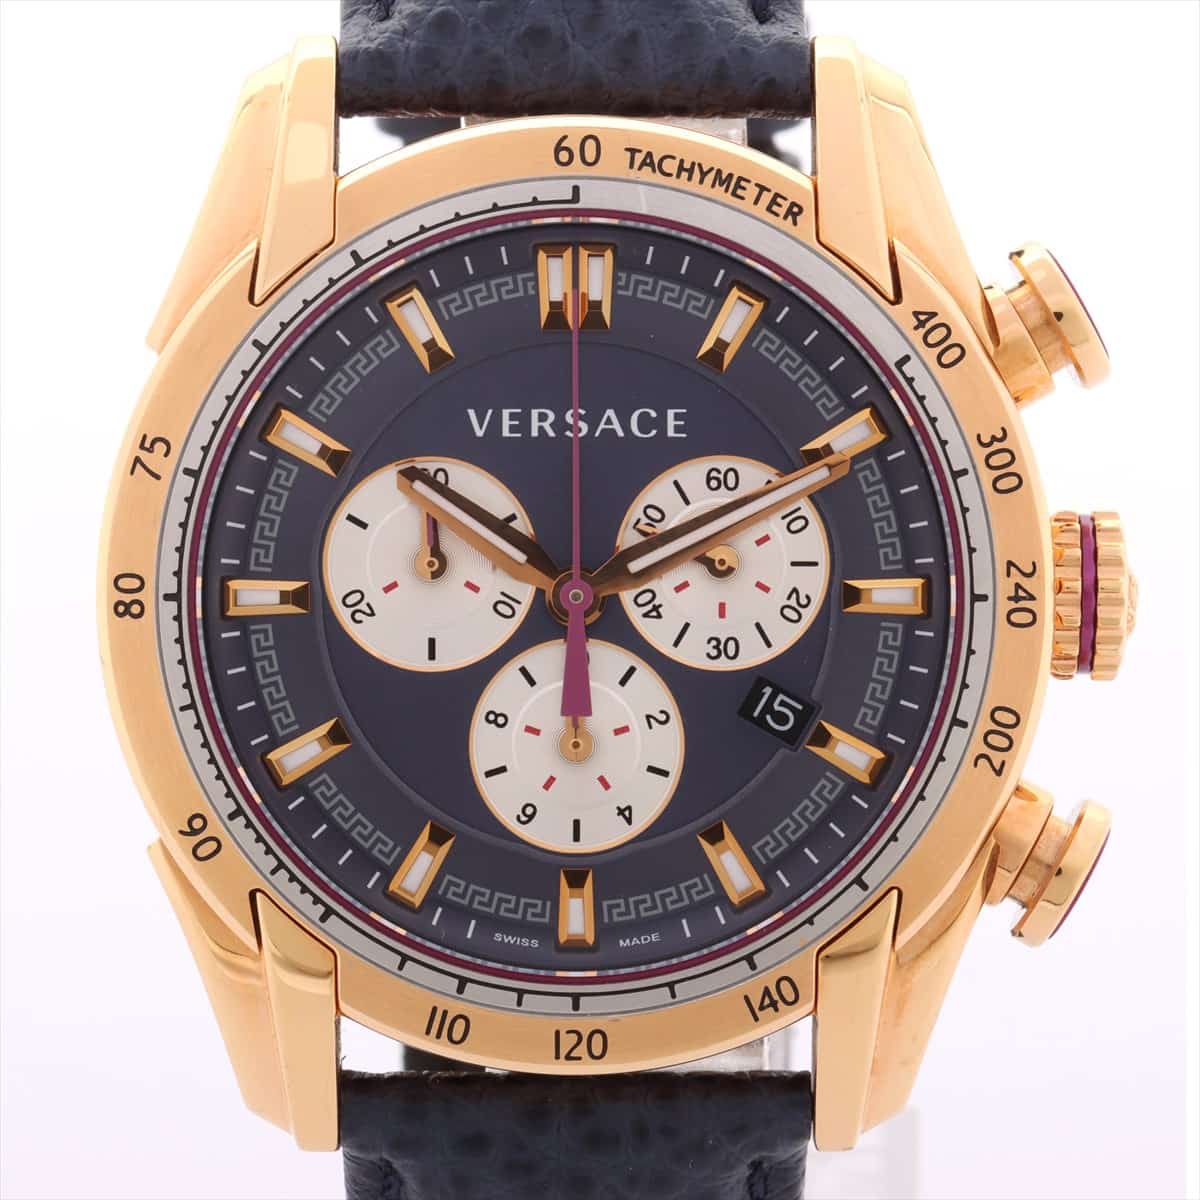 VERSACE Chronograph GP & Leather QZ Blue-Face Extra-Link 5